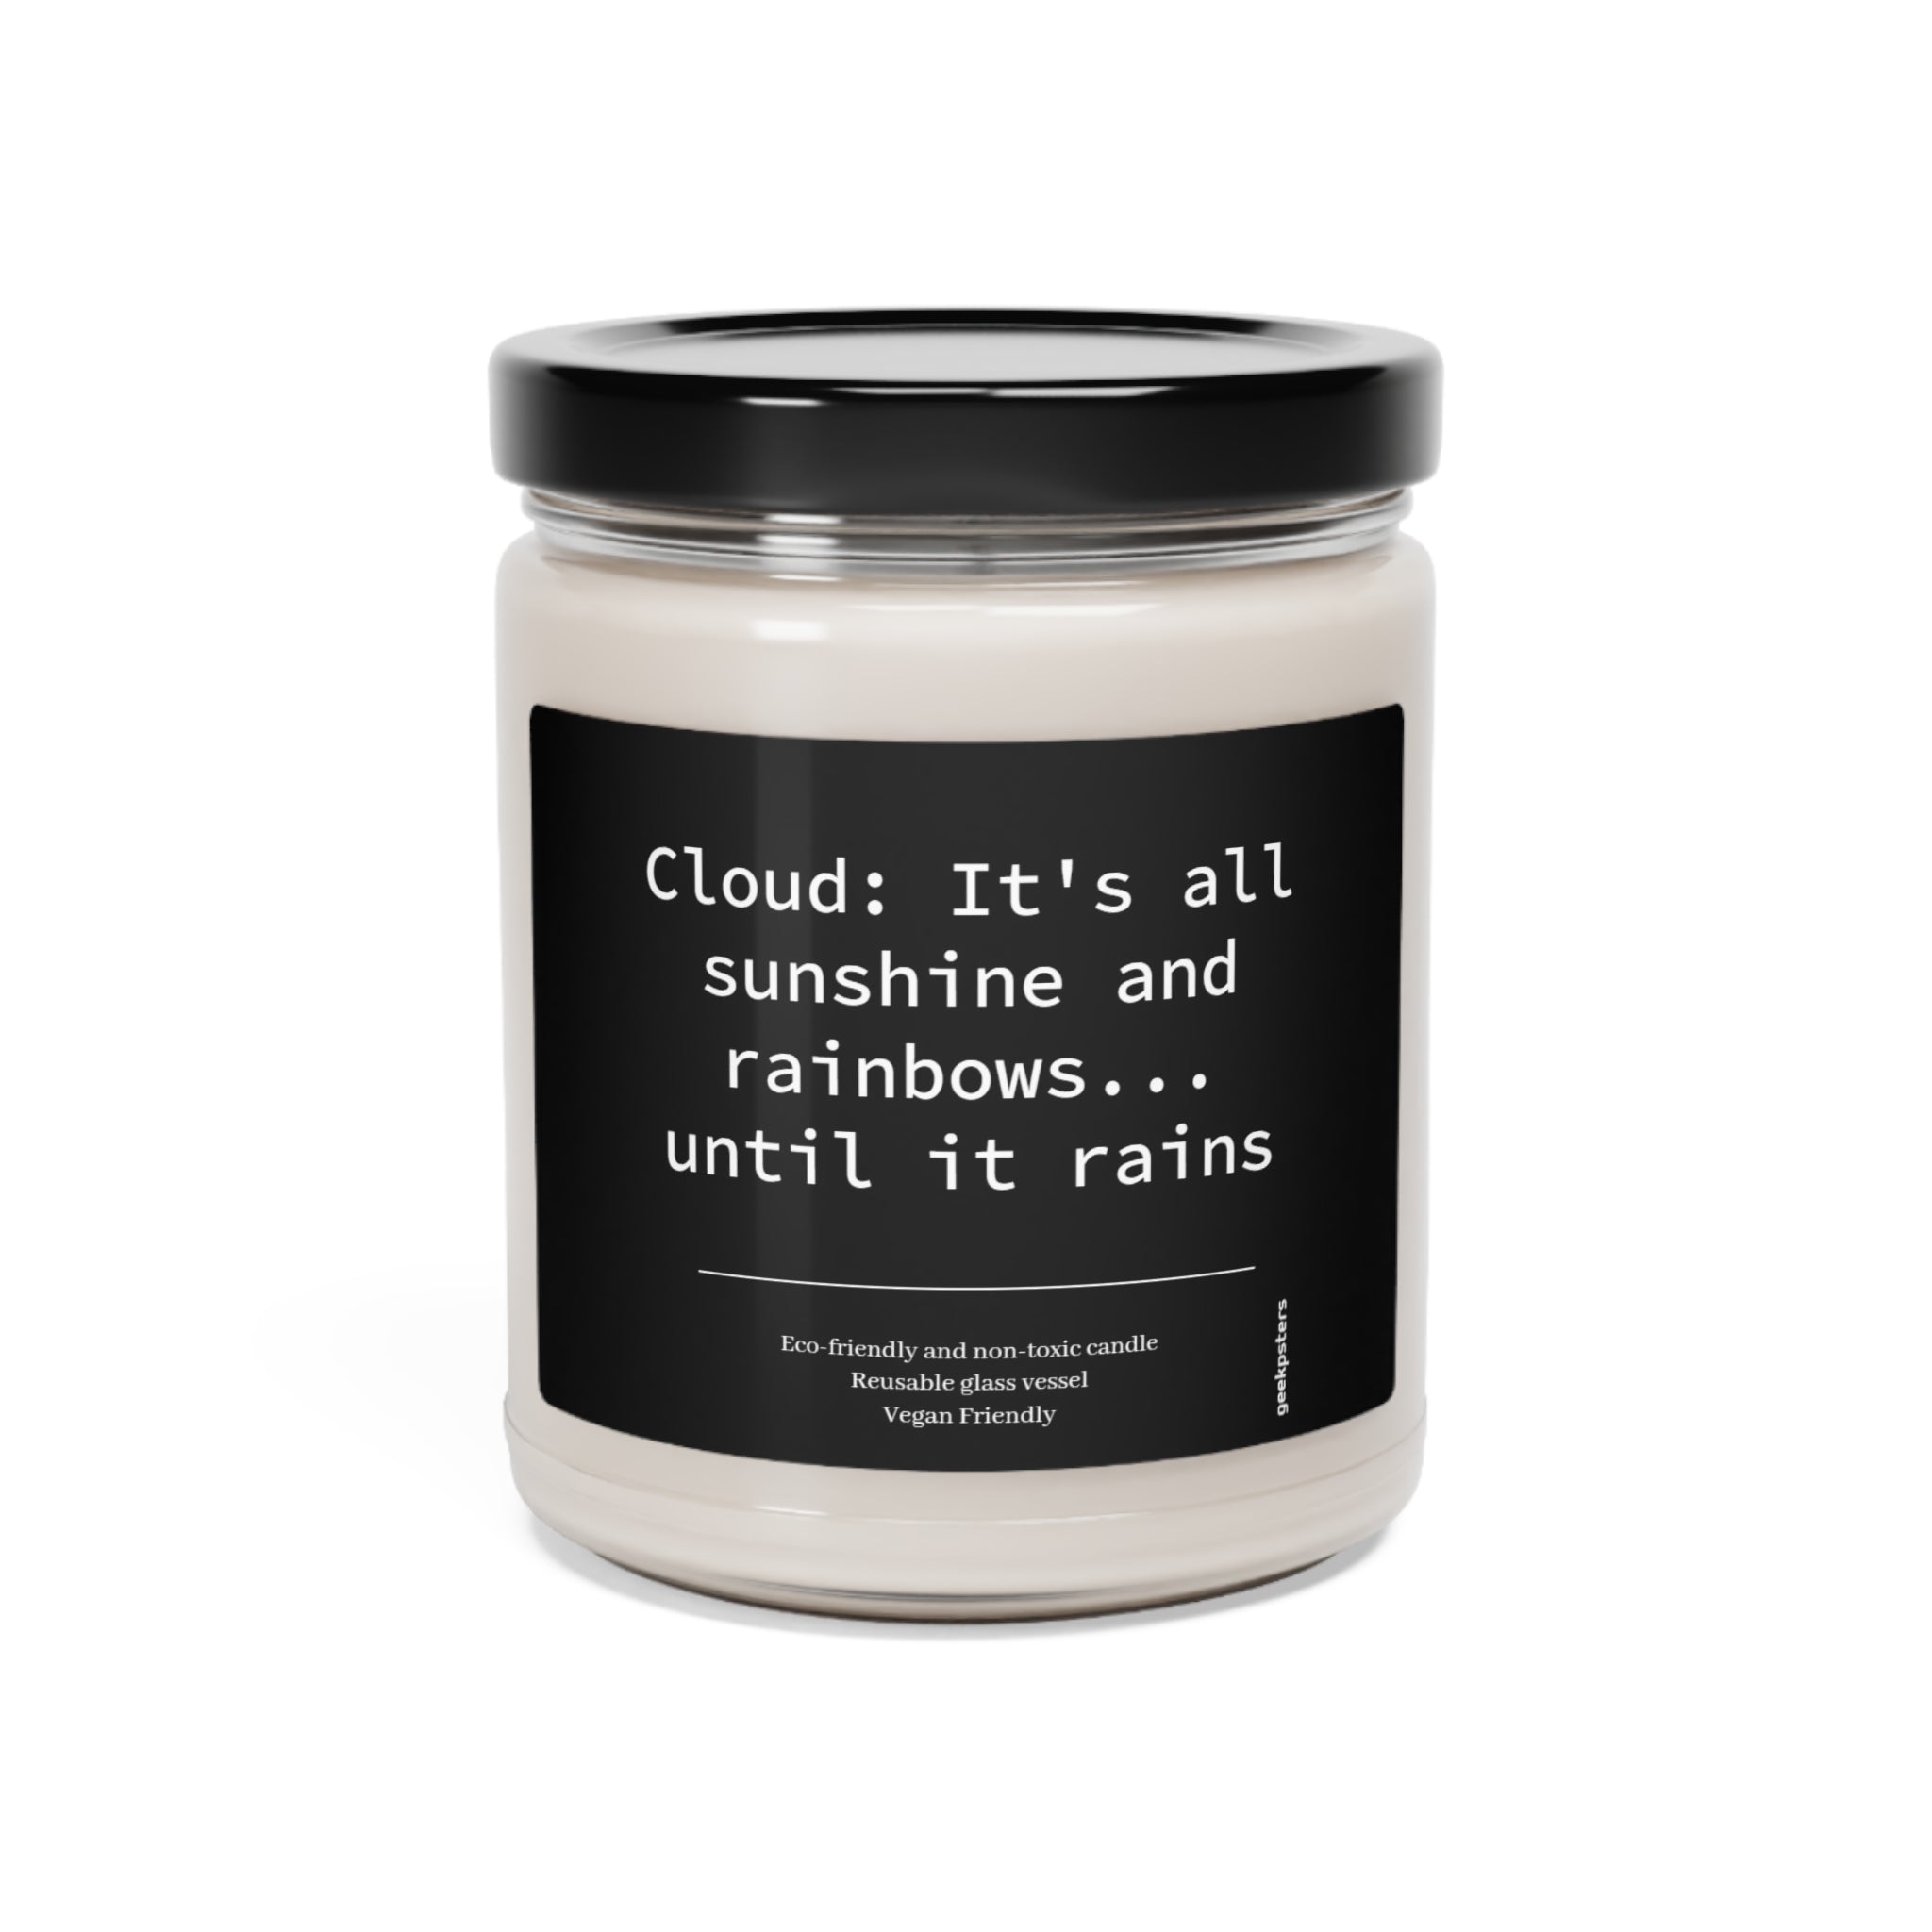 A candle jar made from a natural soy wax blend, with a label that reads "Cloud: Its All Sunshine and Rainbow..until its Rain" along with eco-friendly and vegan-friendly badges.